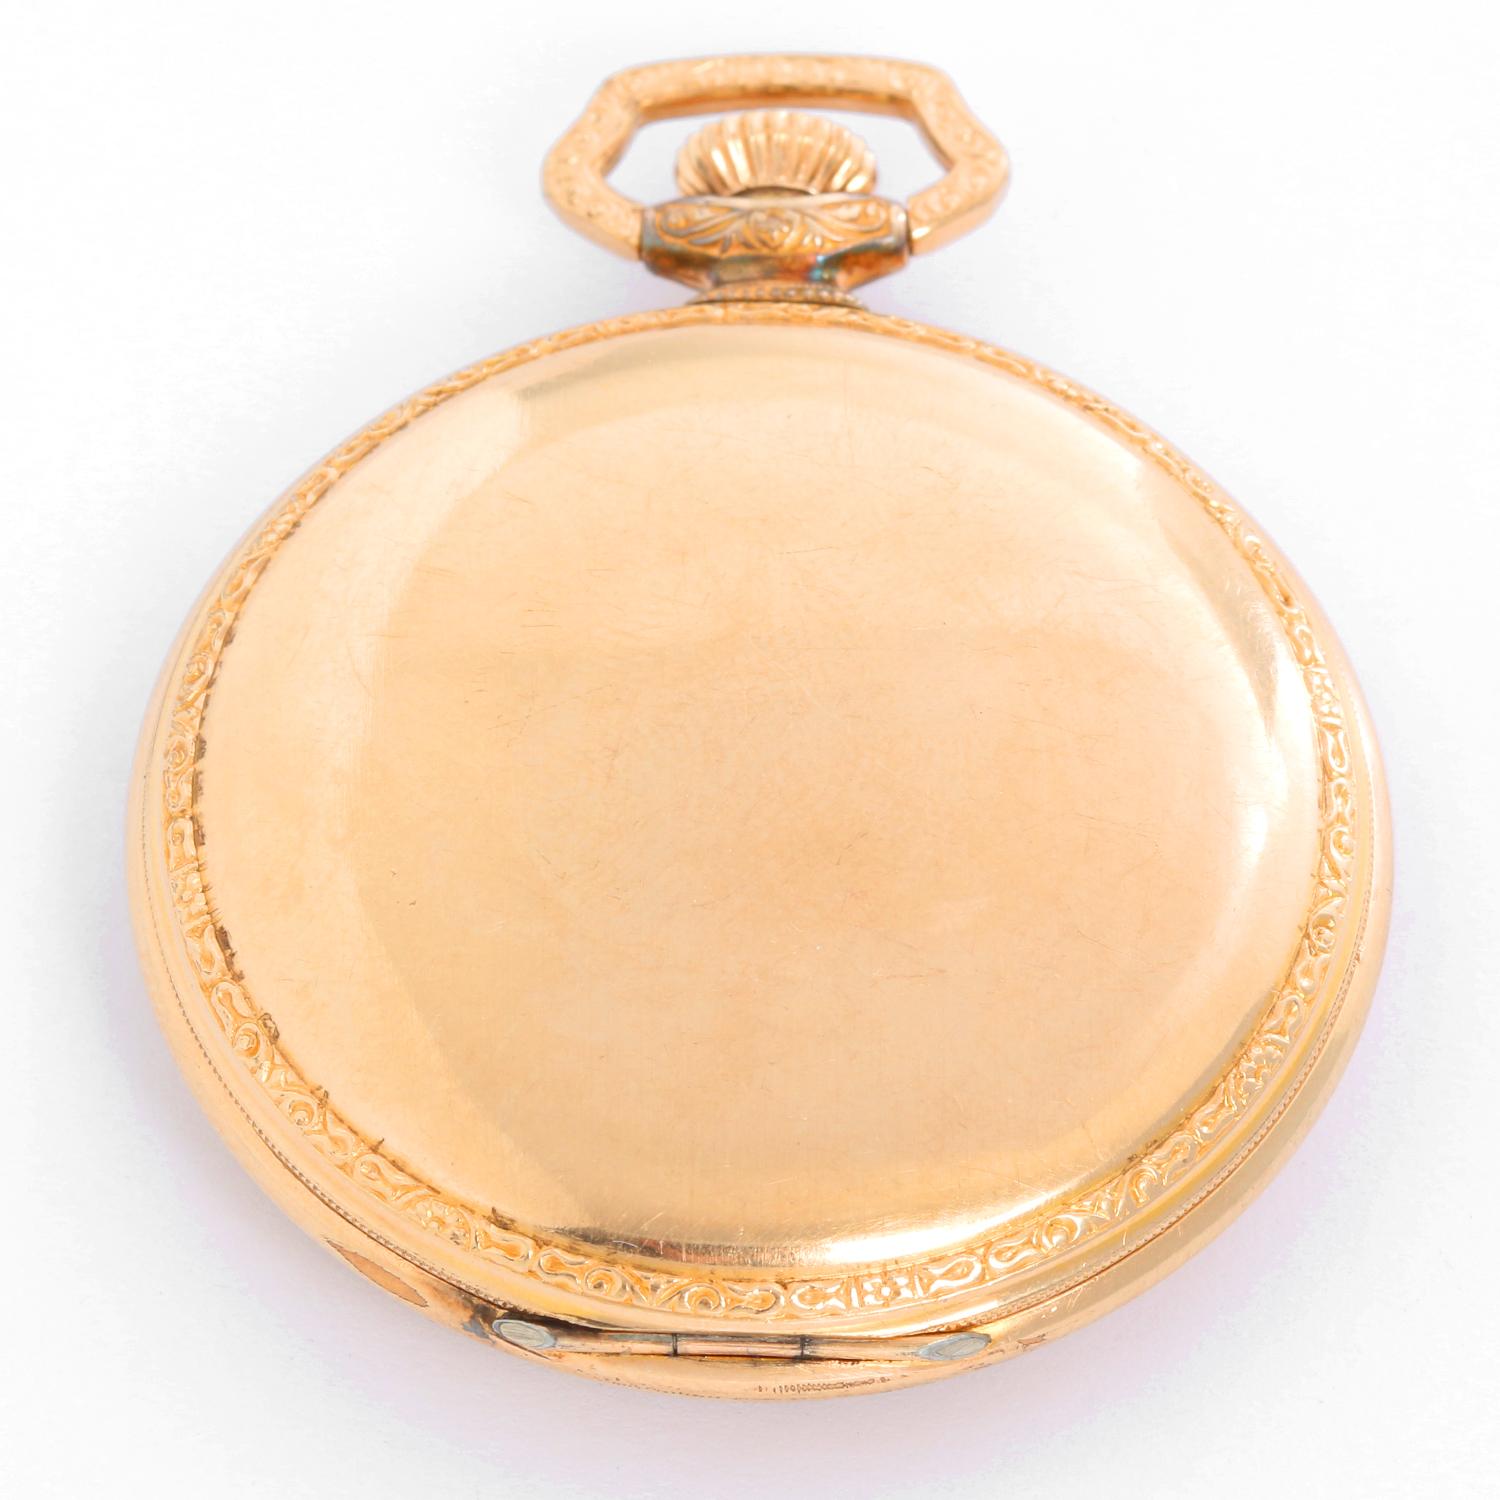 Dudley 14k Yellow Gold Masonic Model 3 Pocket Watch - Manual winding. 14K yellow gold ( 45 mm ) with ornate bezel; Display back seeing various bridges made in the shape of the 